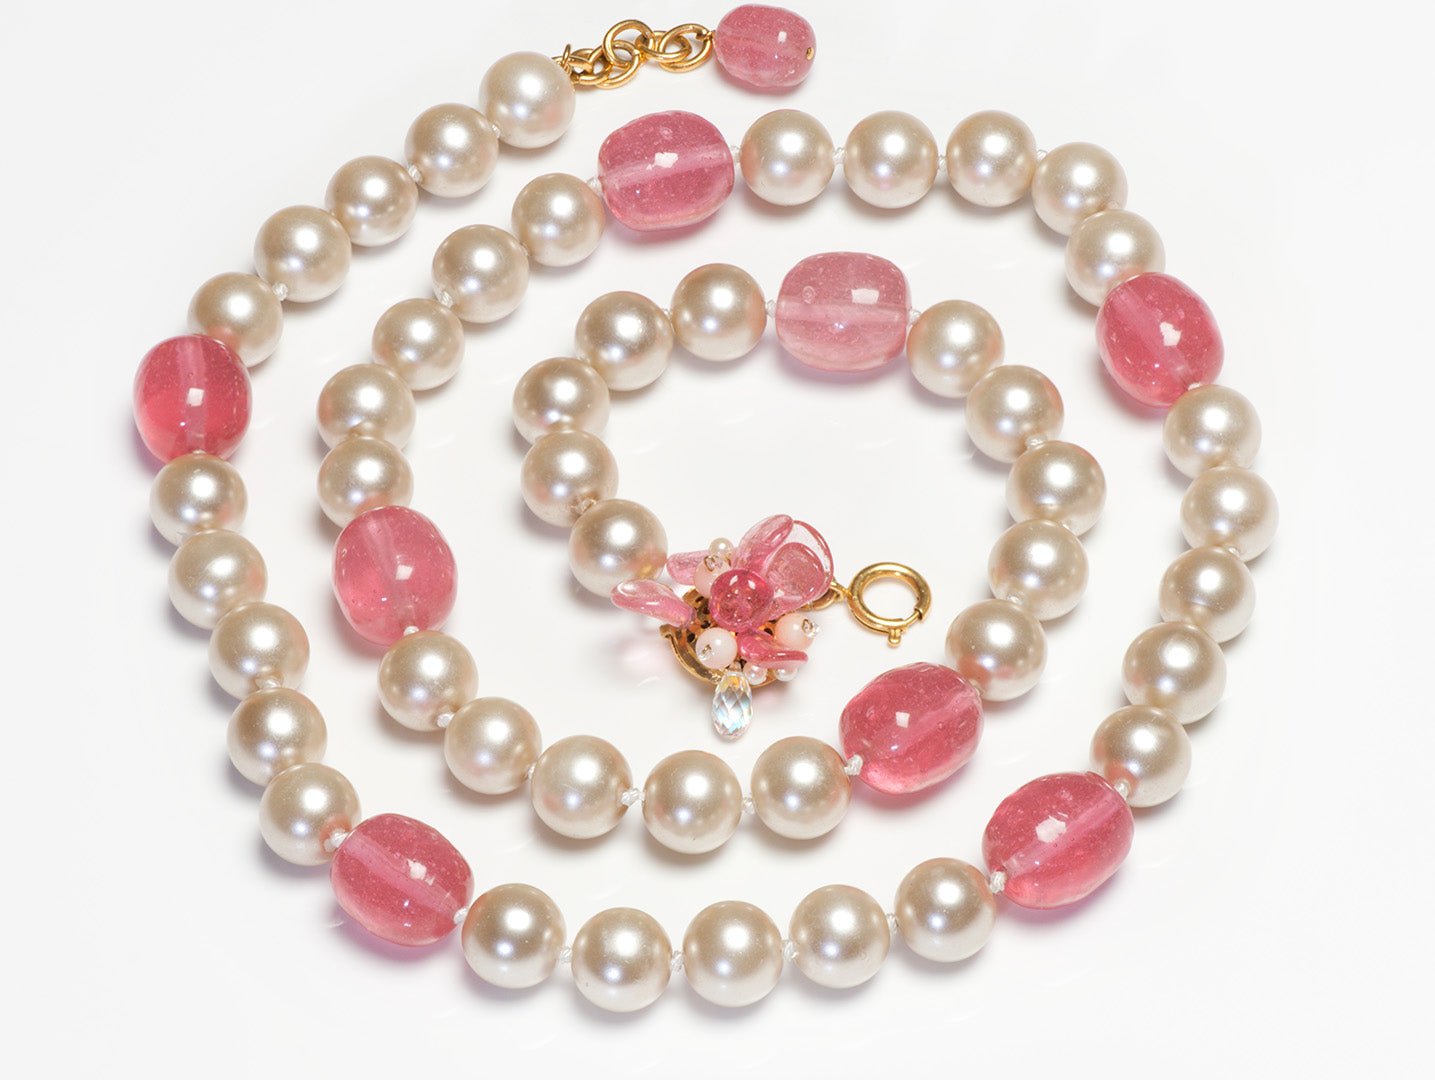 Chanel Spring 1997 Maison Gripoix Pink Glass Pearl Beads Sautoir Necklace